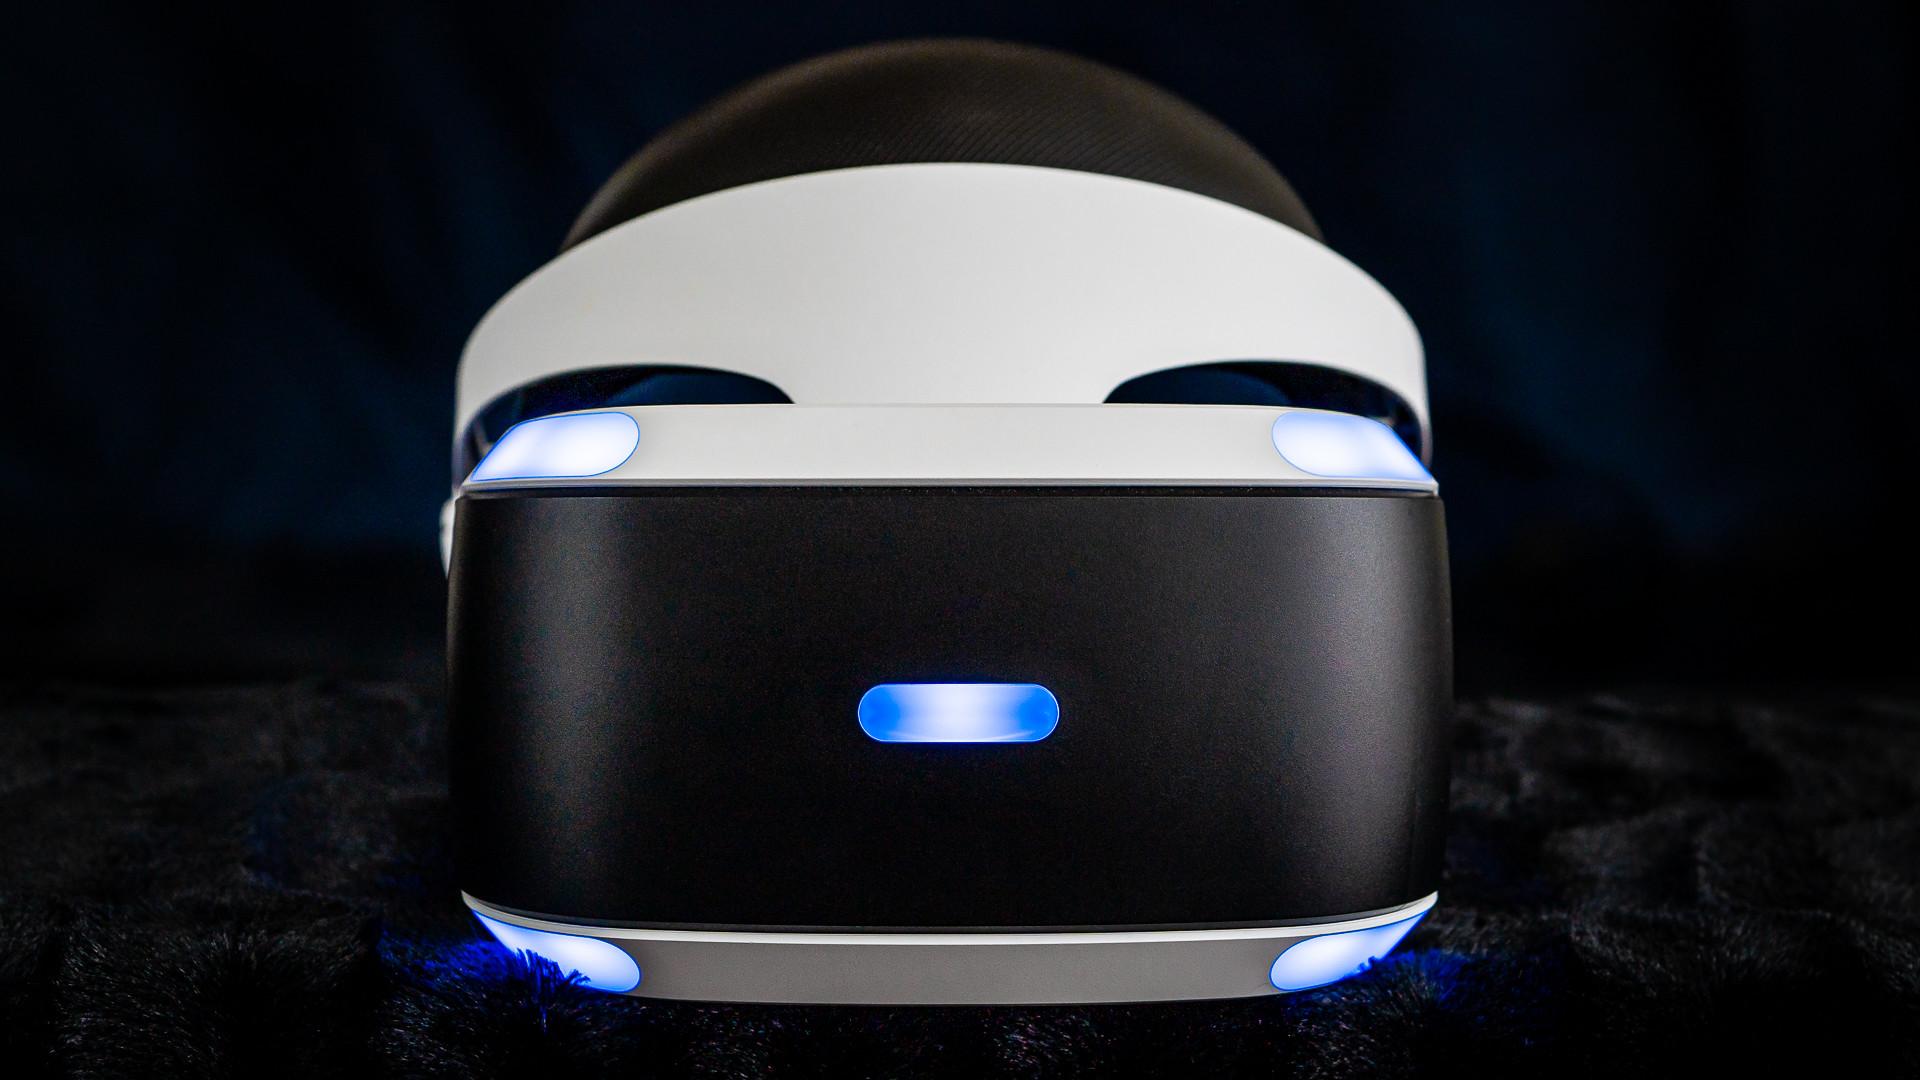 PlayStation on Twitter: "We're turning the spotlight on #PSVR, with a full day of new game announcements for PlayStation VR on PS Blog. first reveal just 15 minutes away. Details: